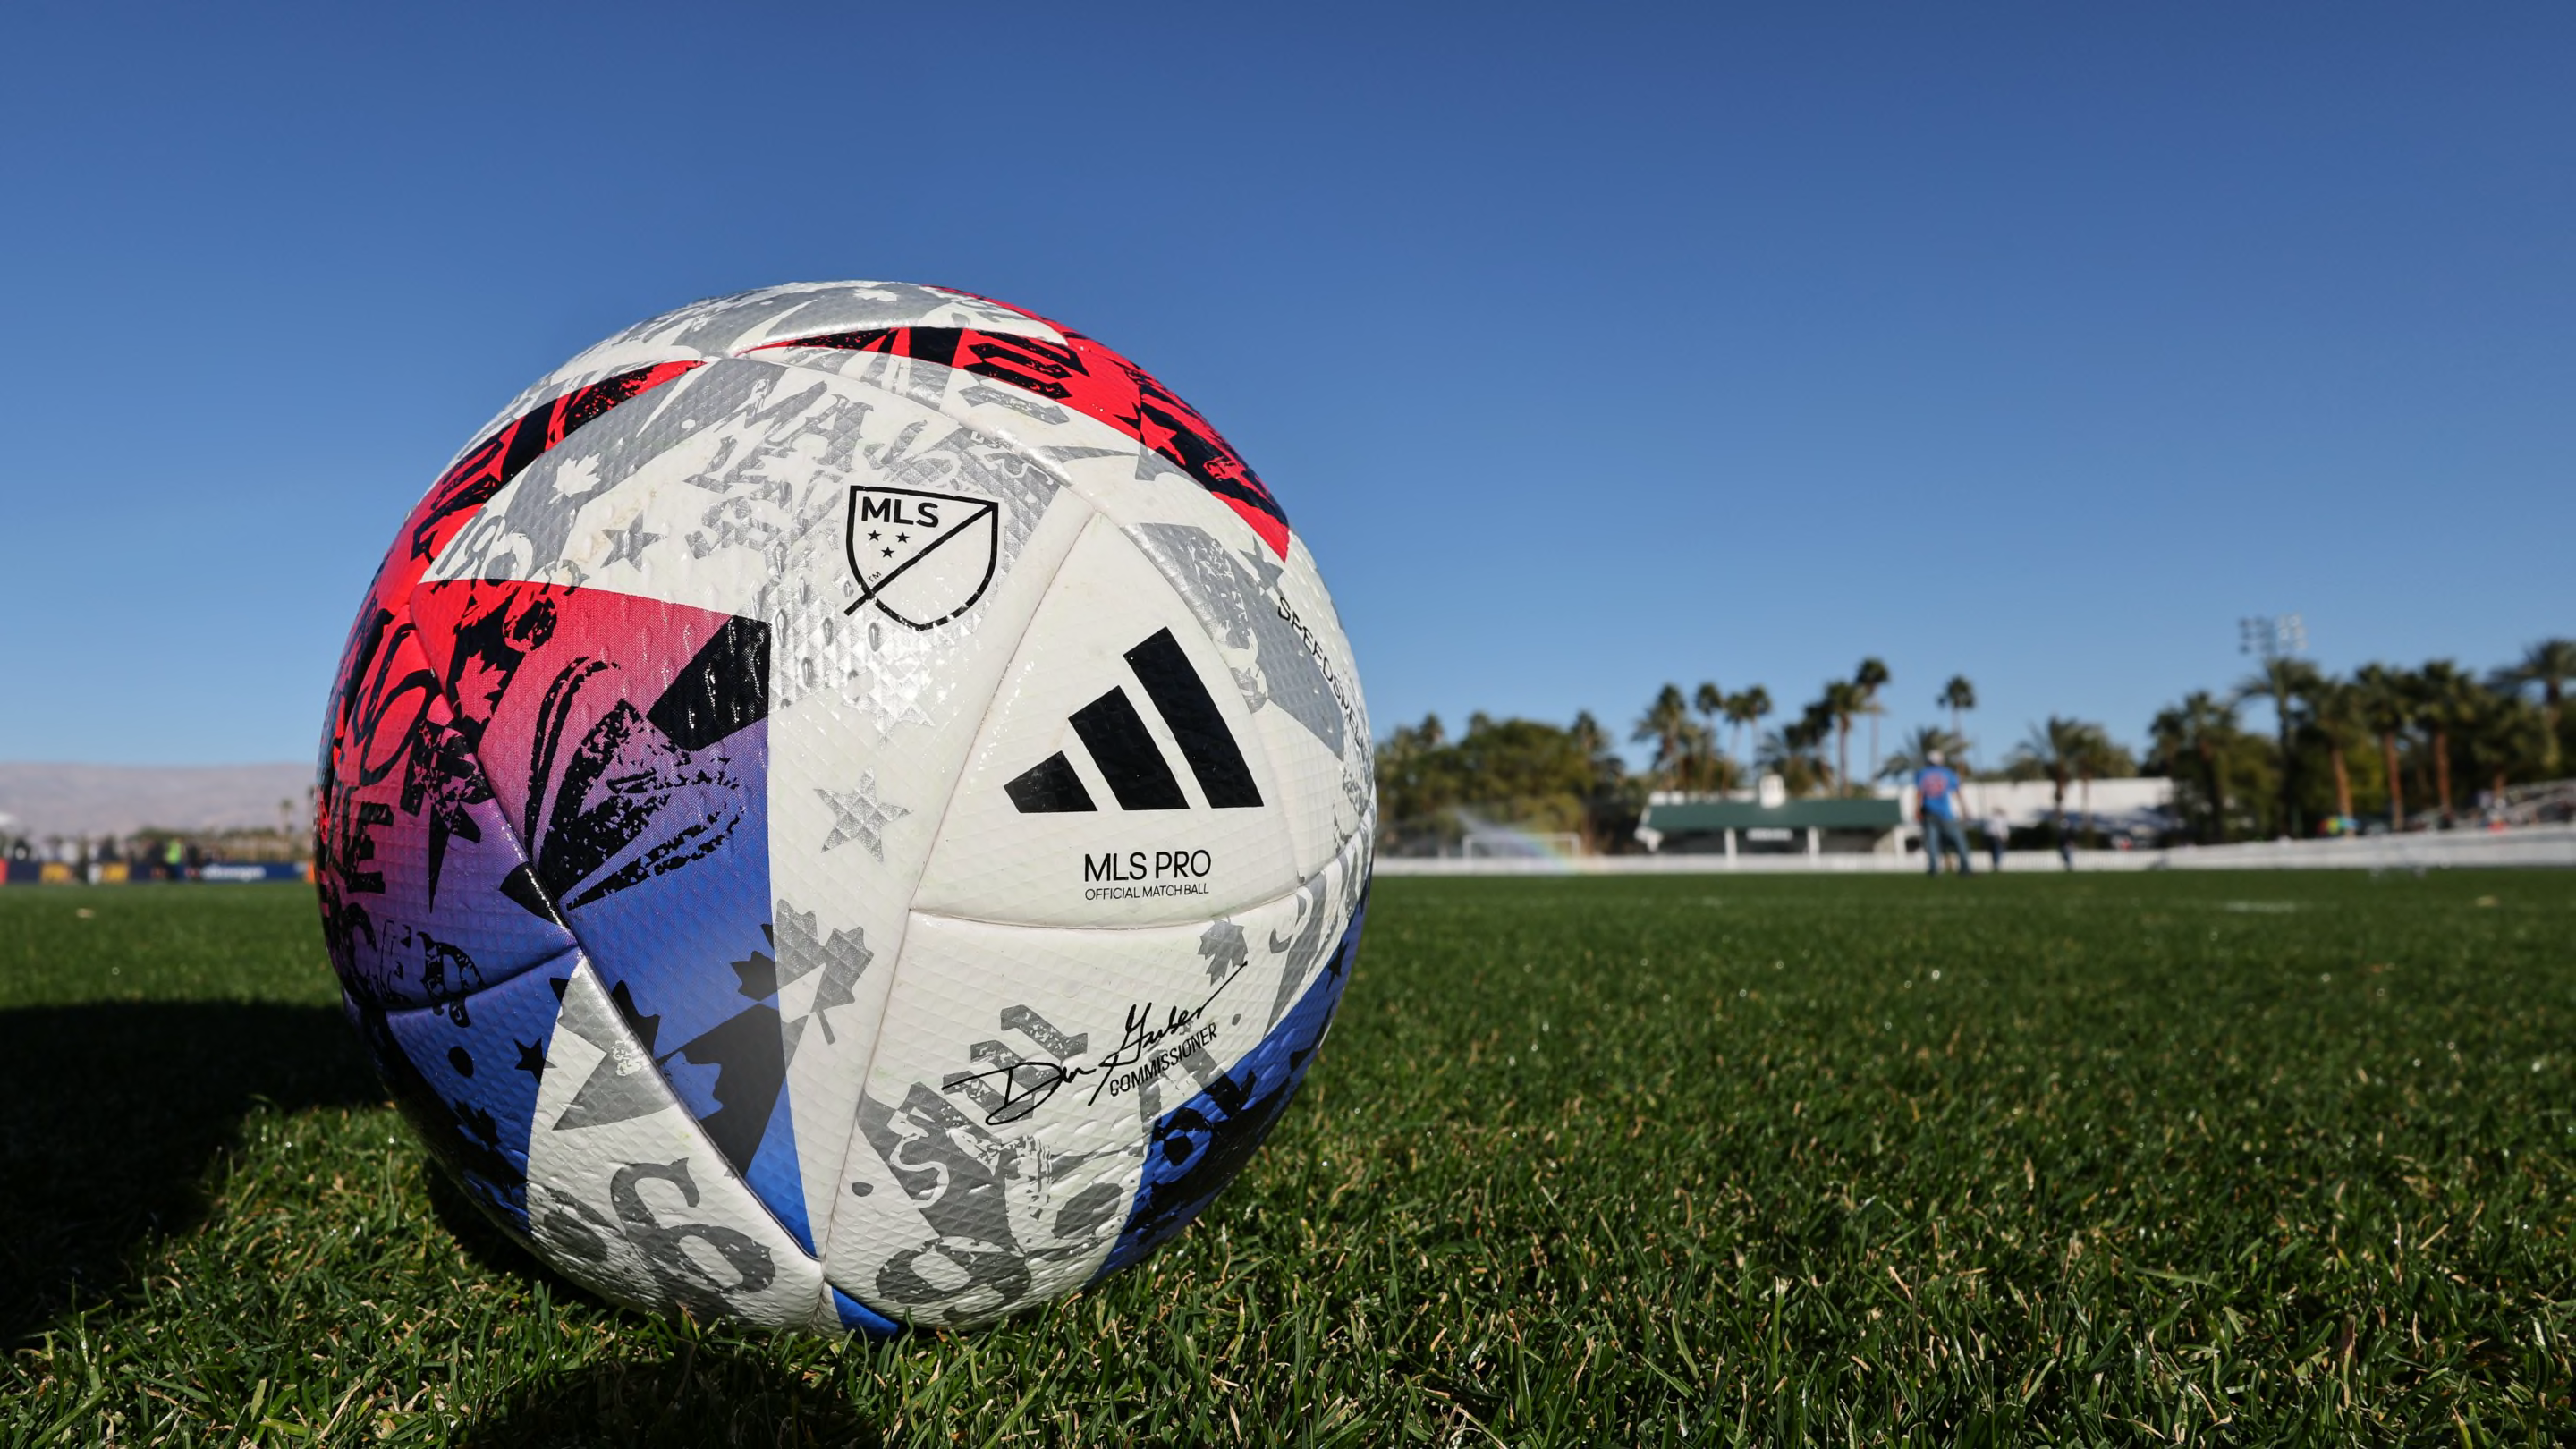 A deep dive into the inner workings of MLS NEXT 